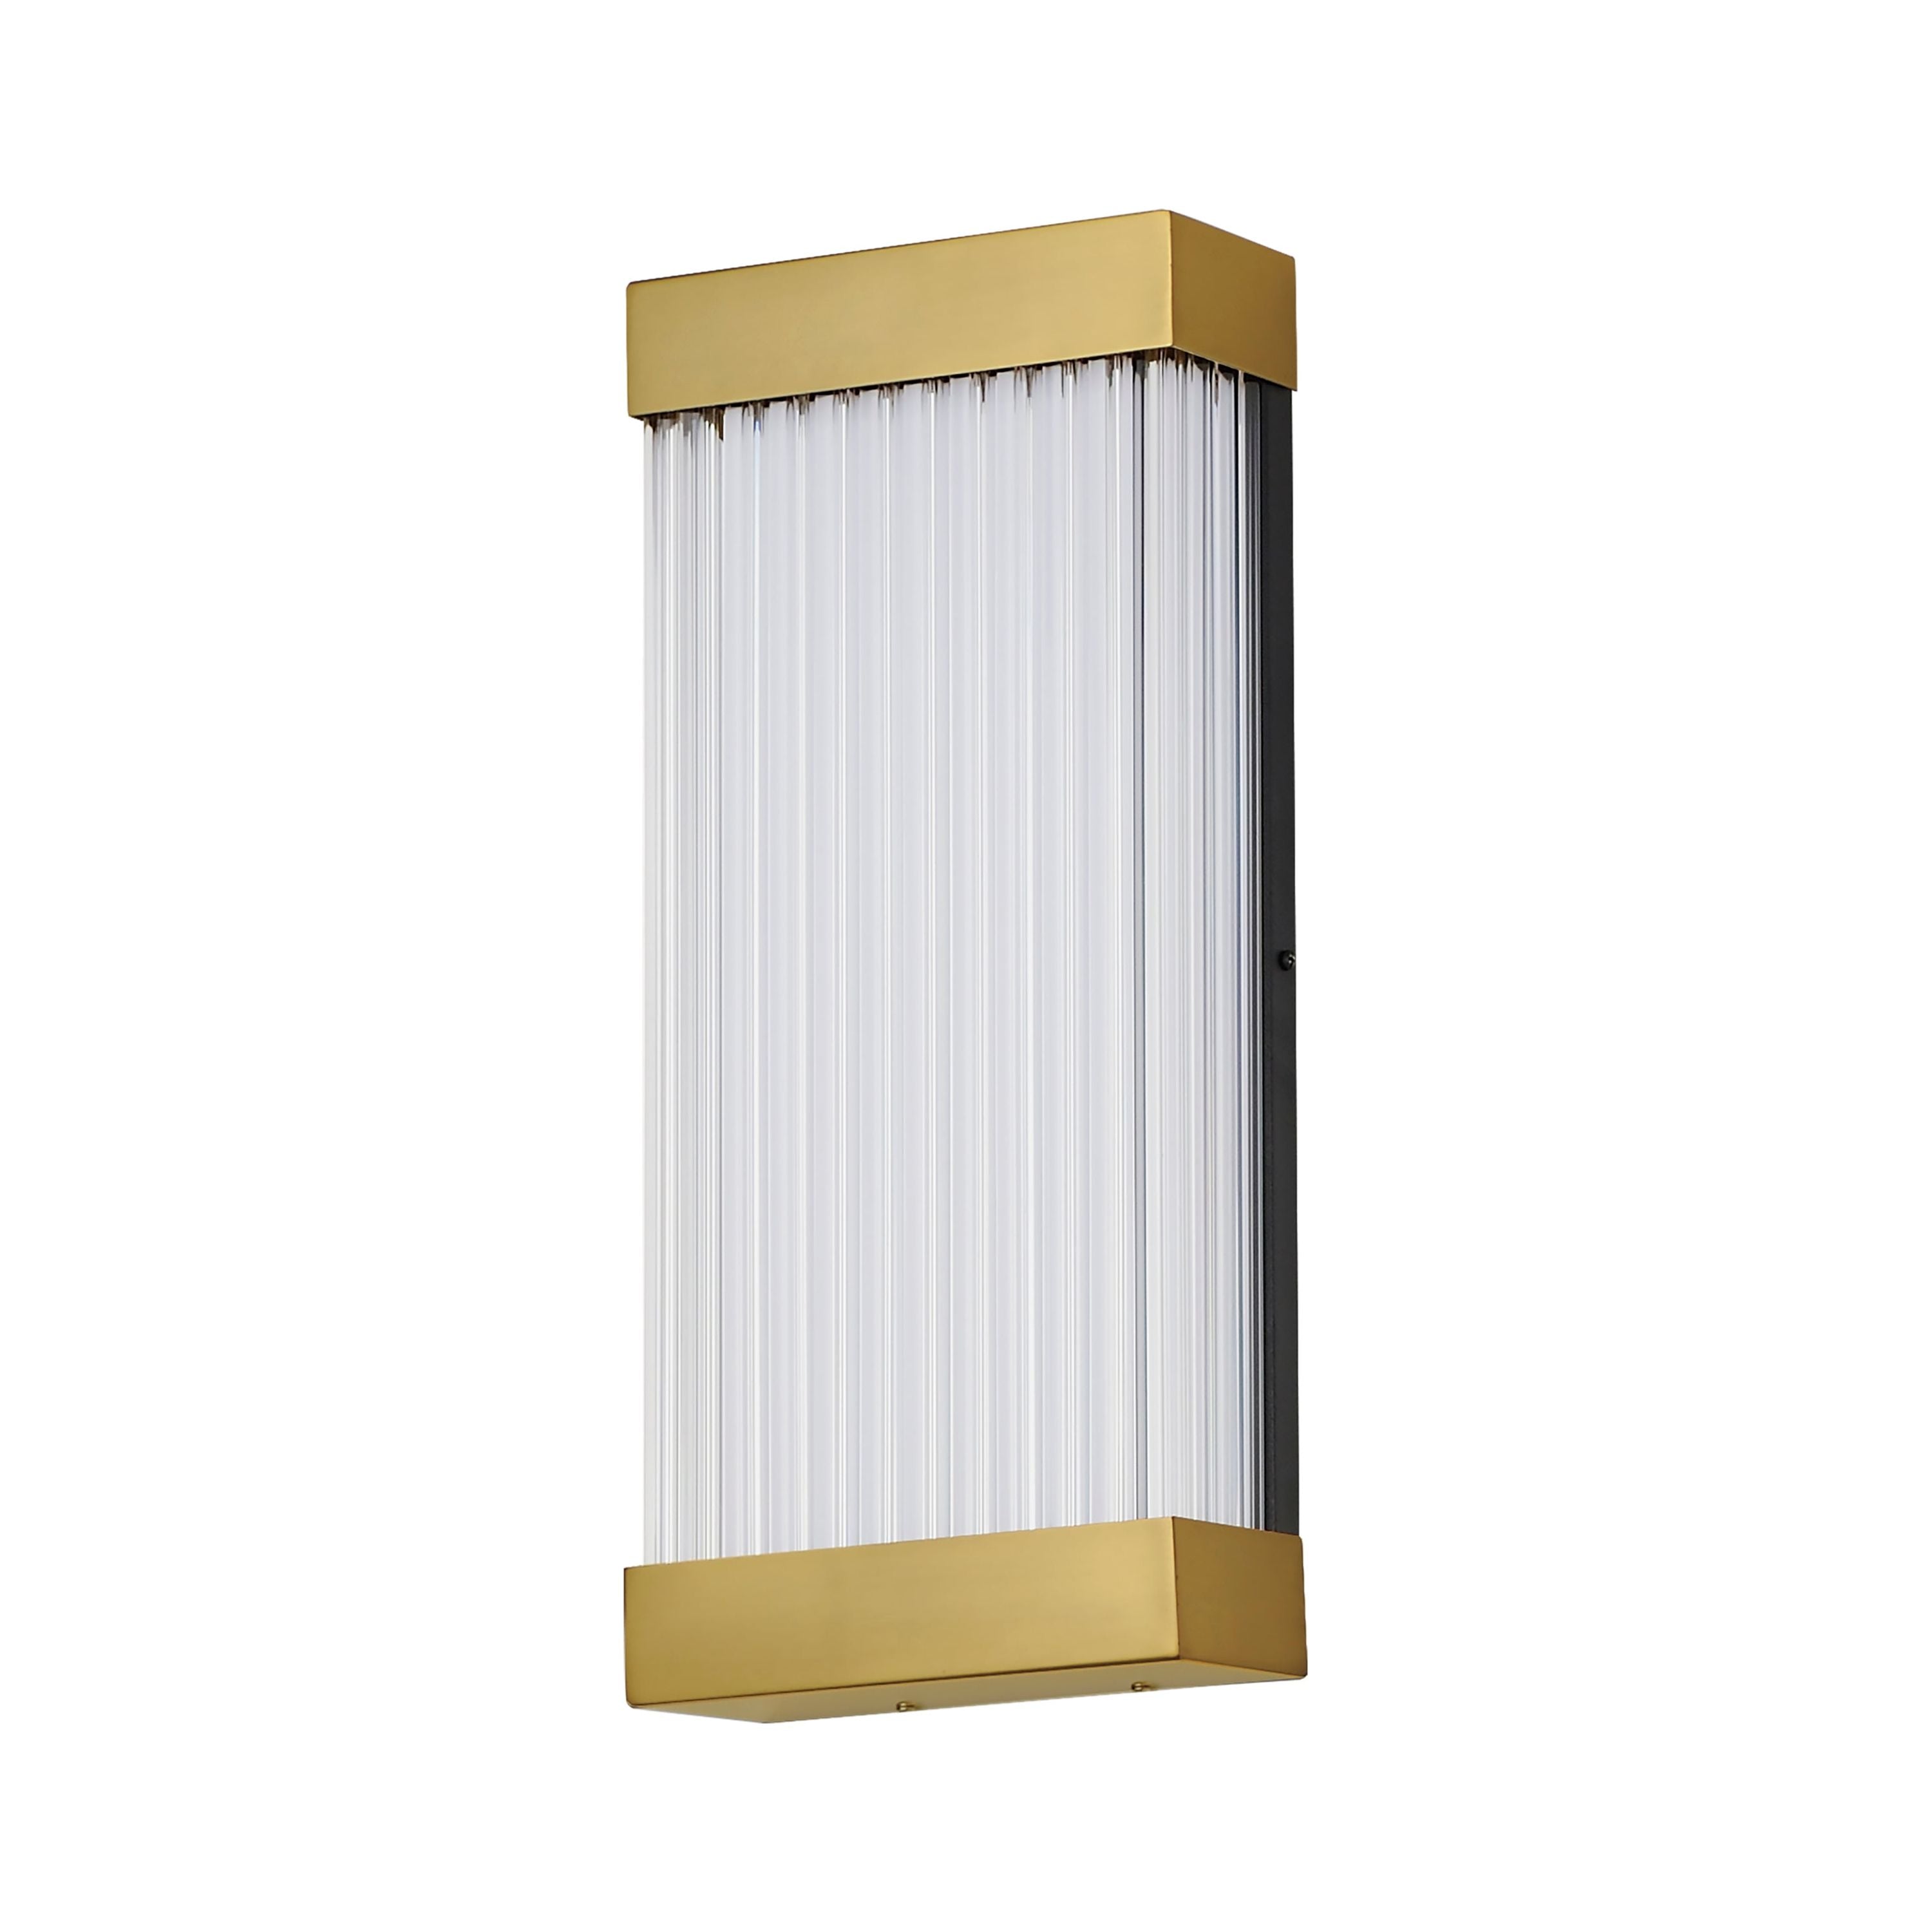 Acropolis 18" LED Outdoor Sconce